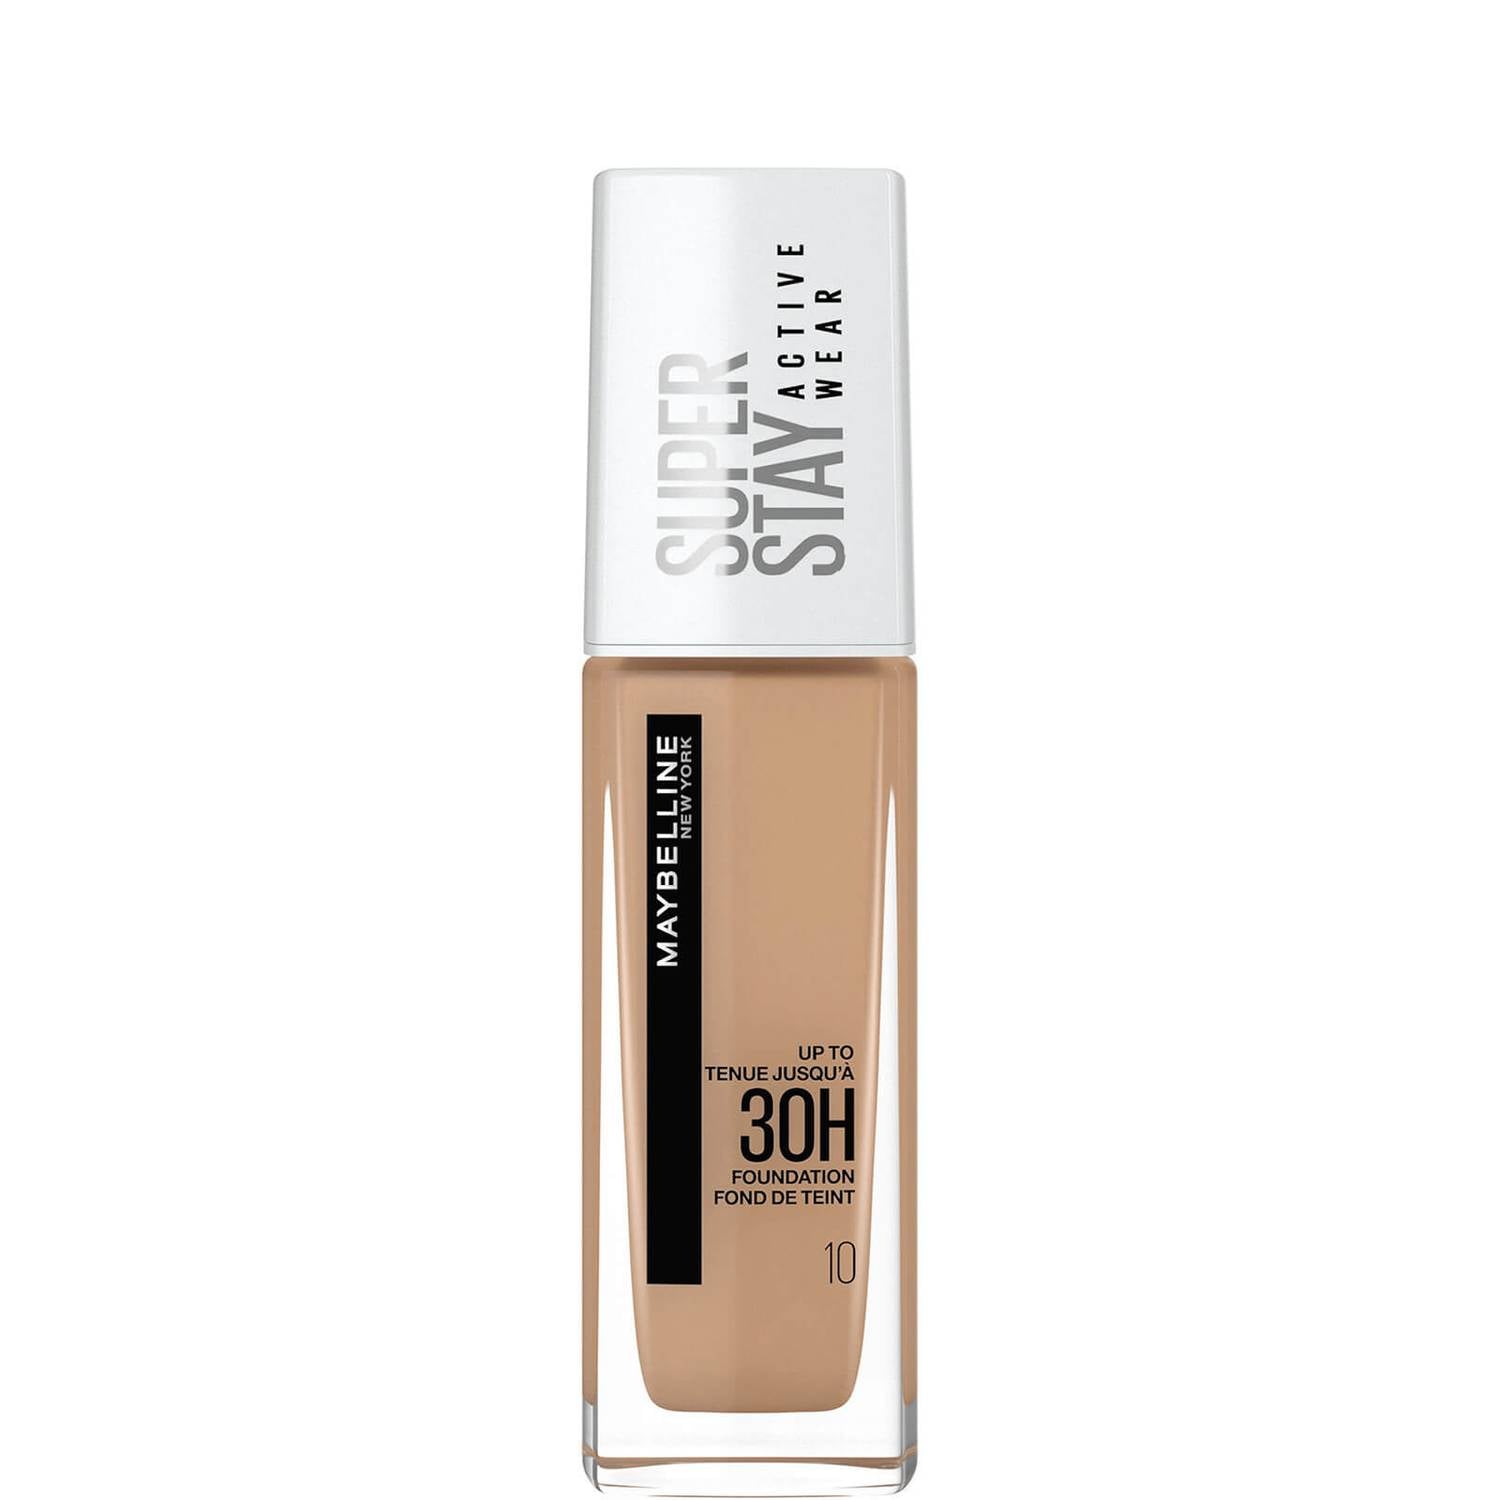 Give Foundation skin all types Makeup for Us Beauty |